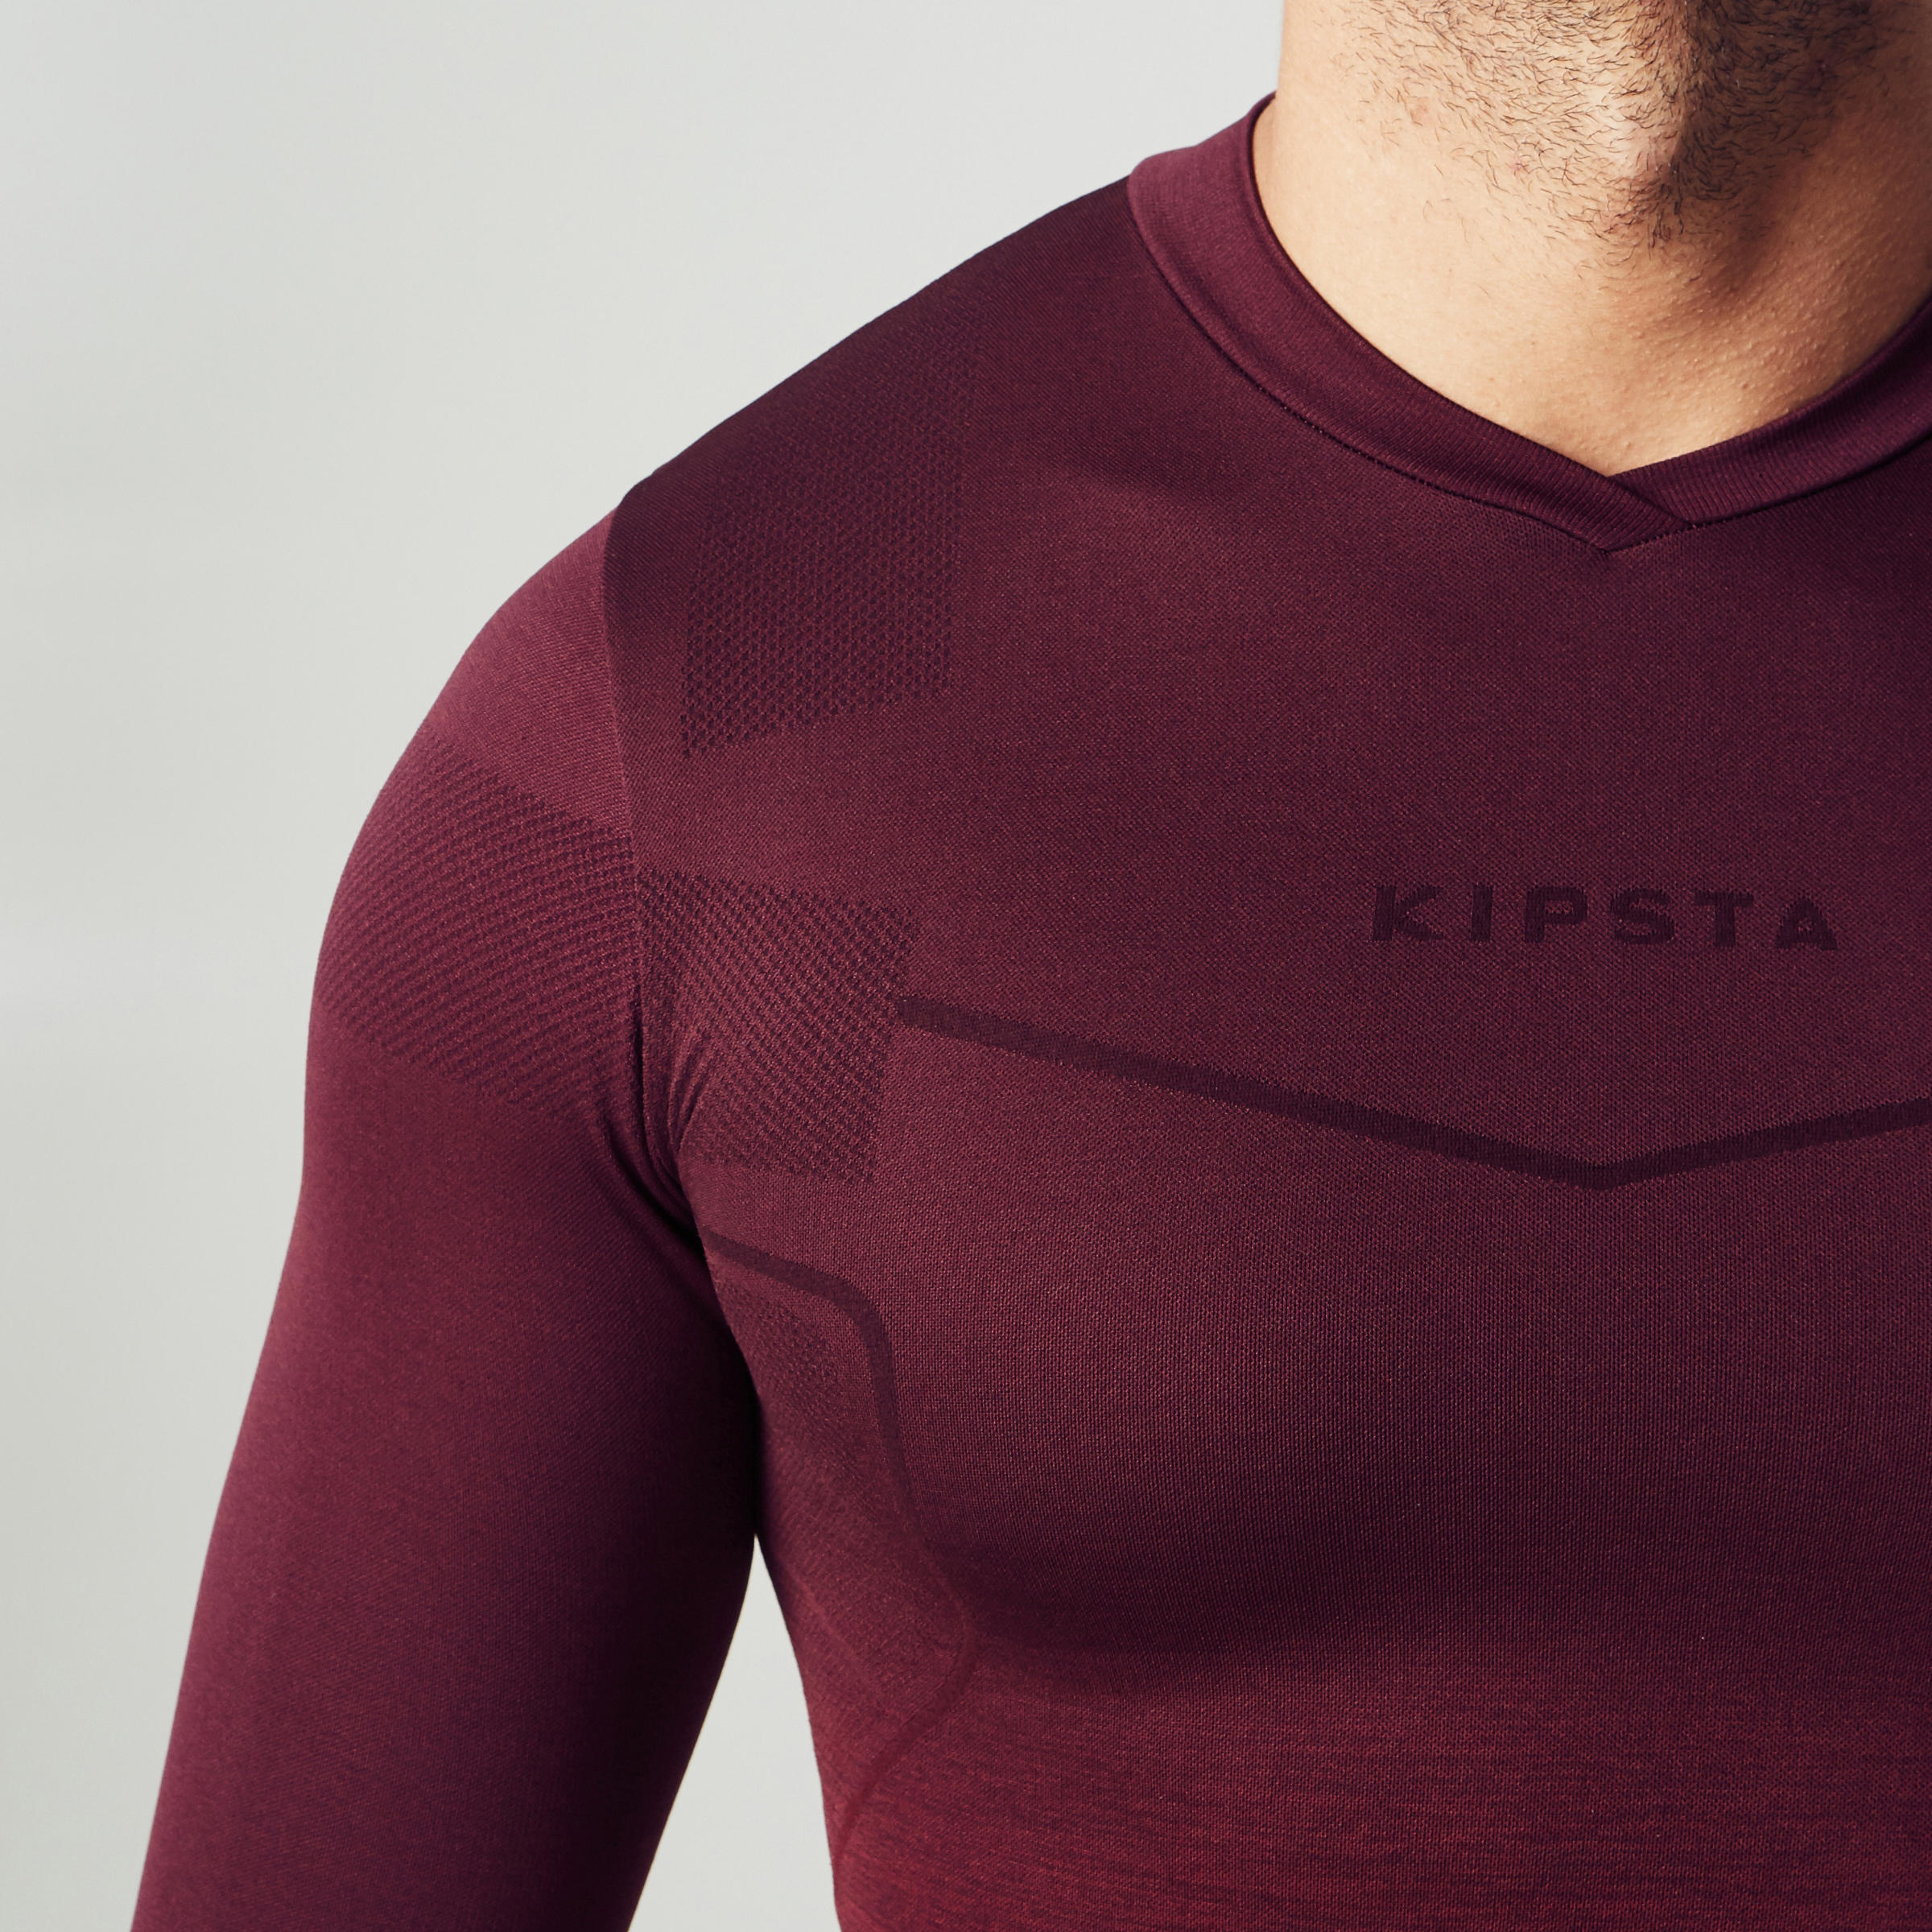 Keepdry 500 Adult Base Layer - Burgundy Ombre 6/11